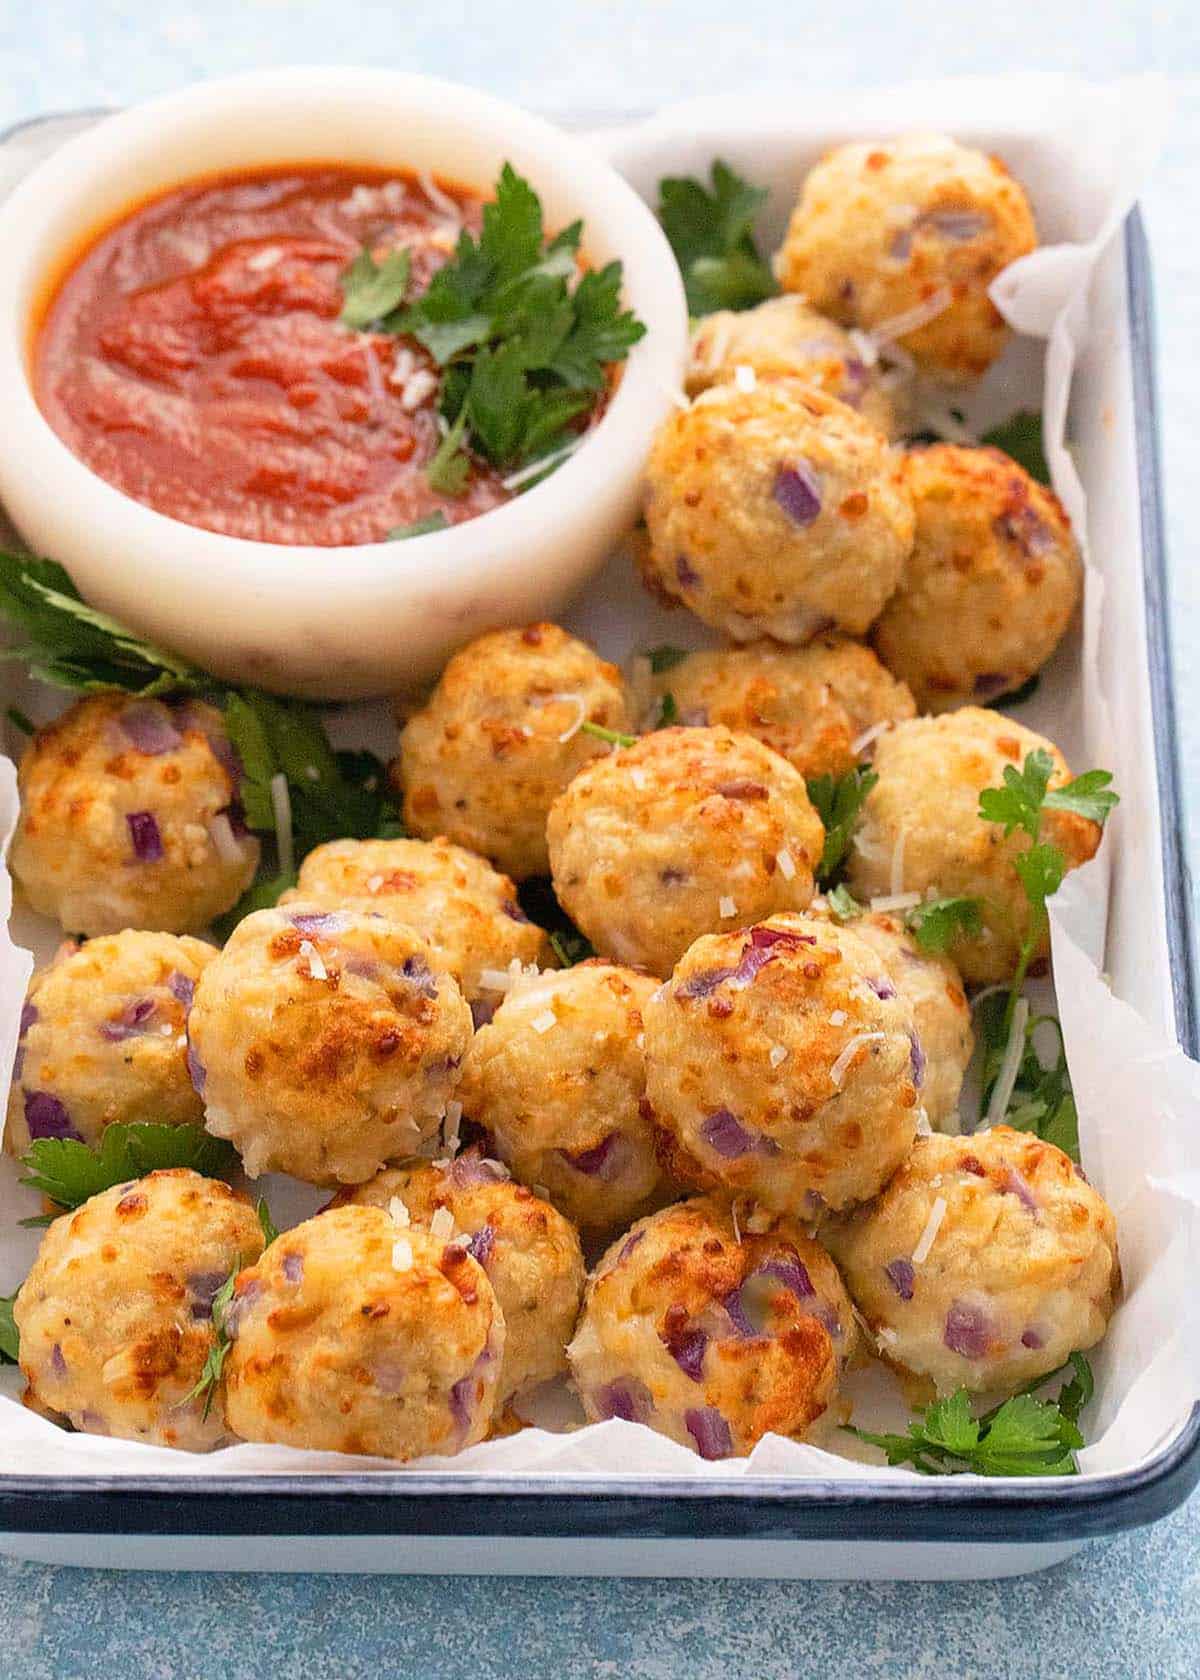 cooked chicken meatballs placed in a white tray along with a white bowl with red marinara sauce.